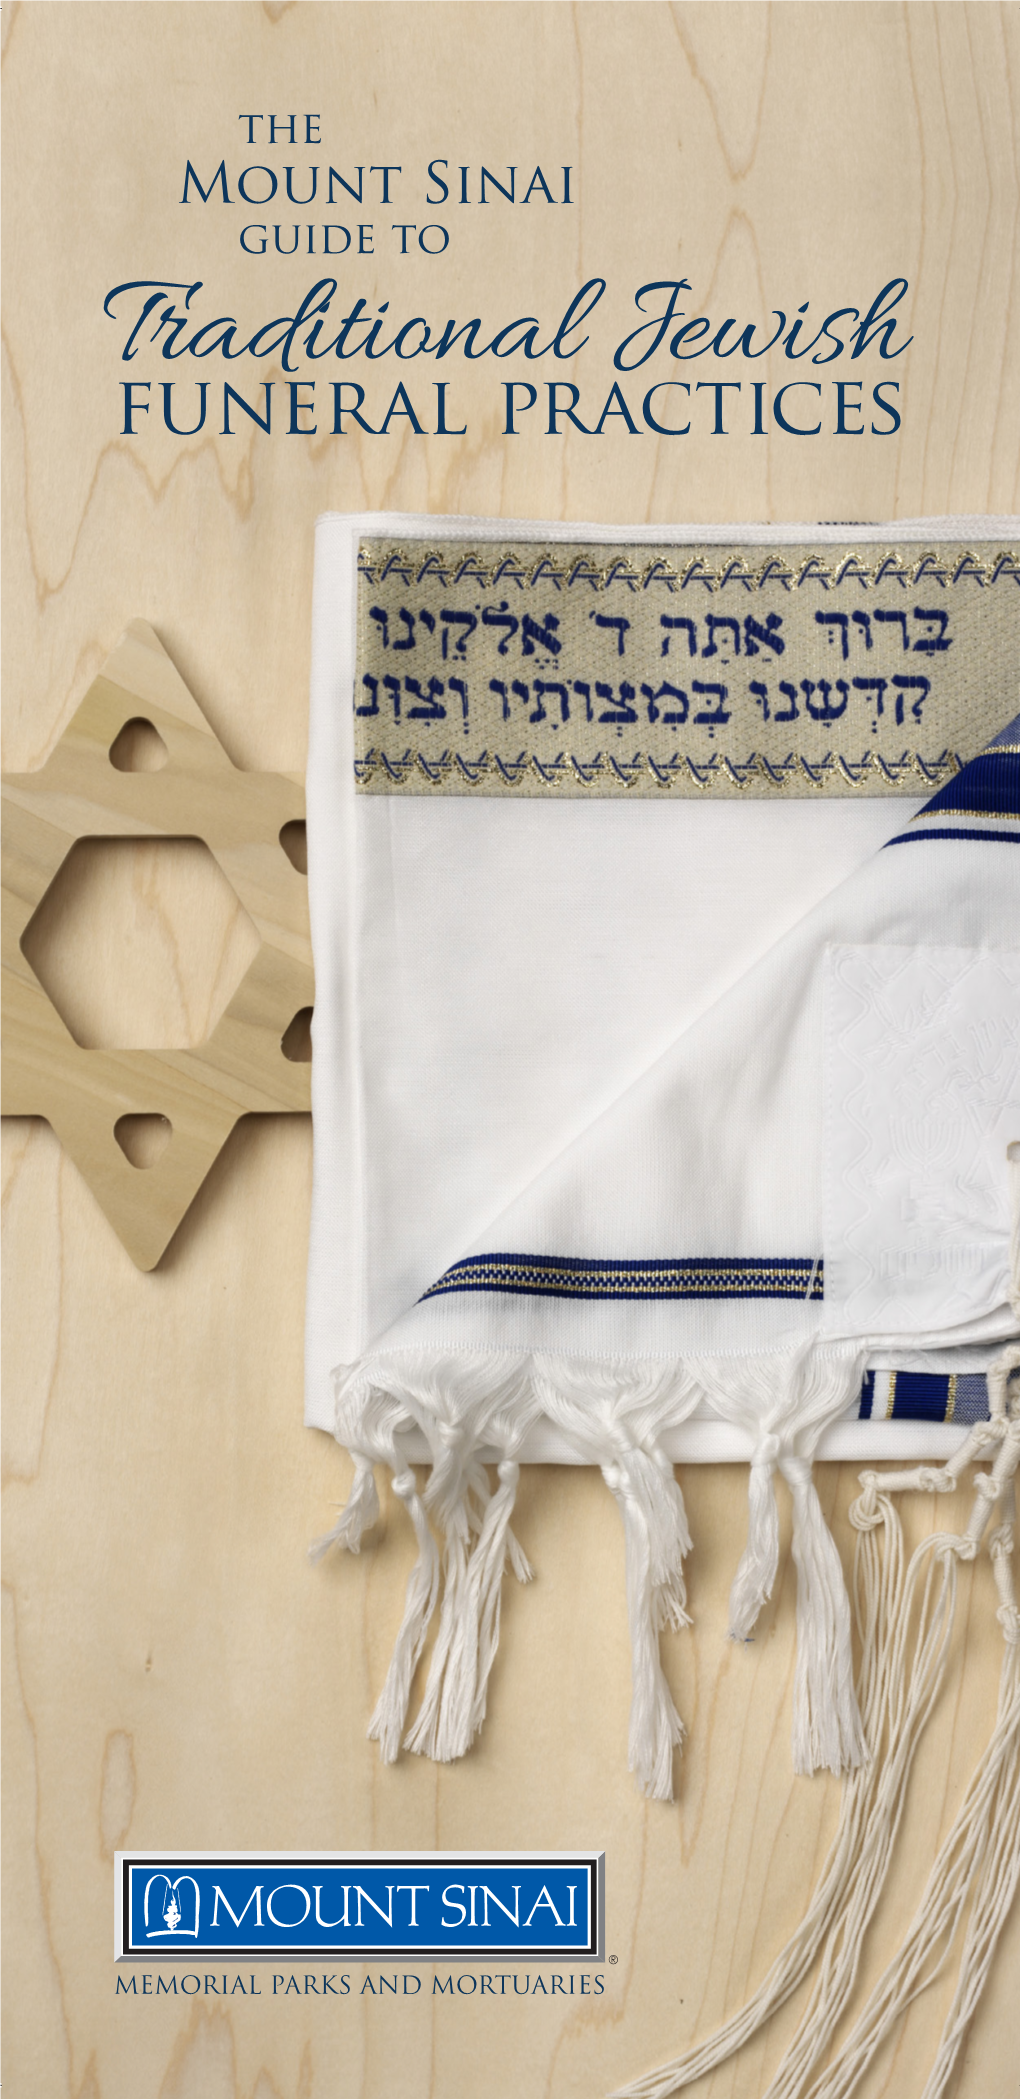 Traditional Jewish Funerals Are Marked by in Keeping with Traditional Standards of Simplicity